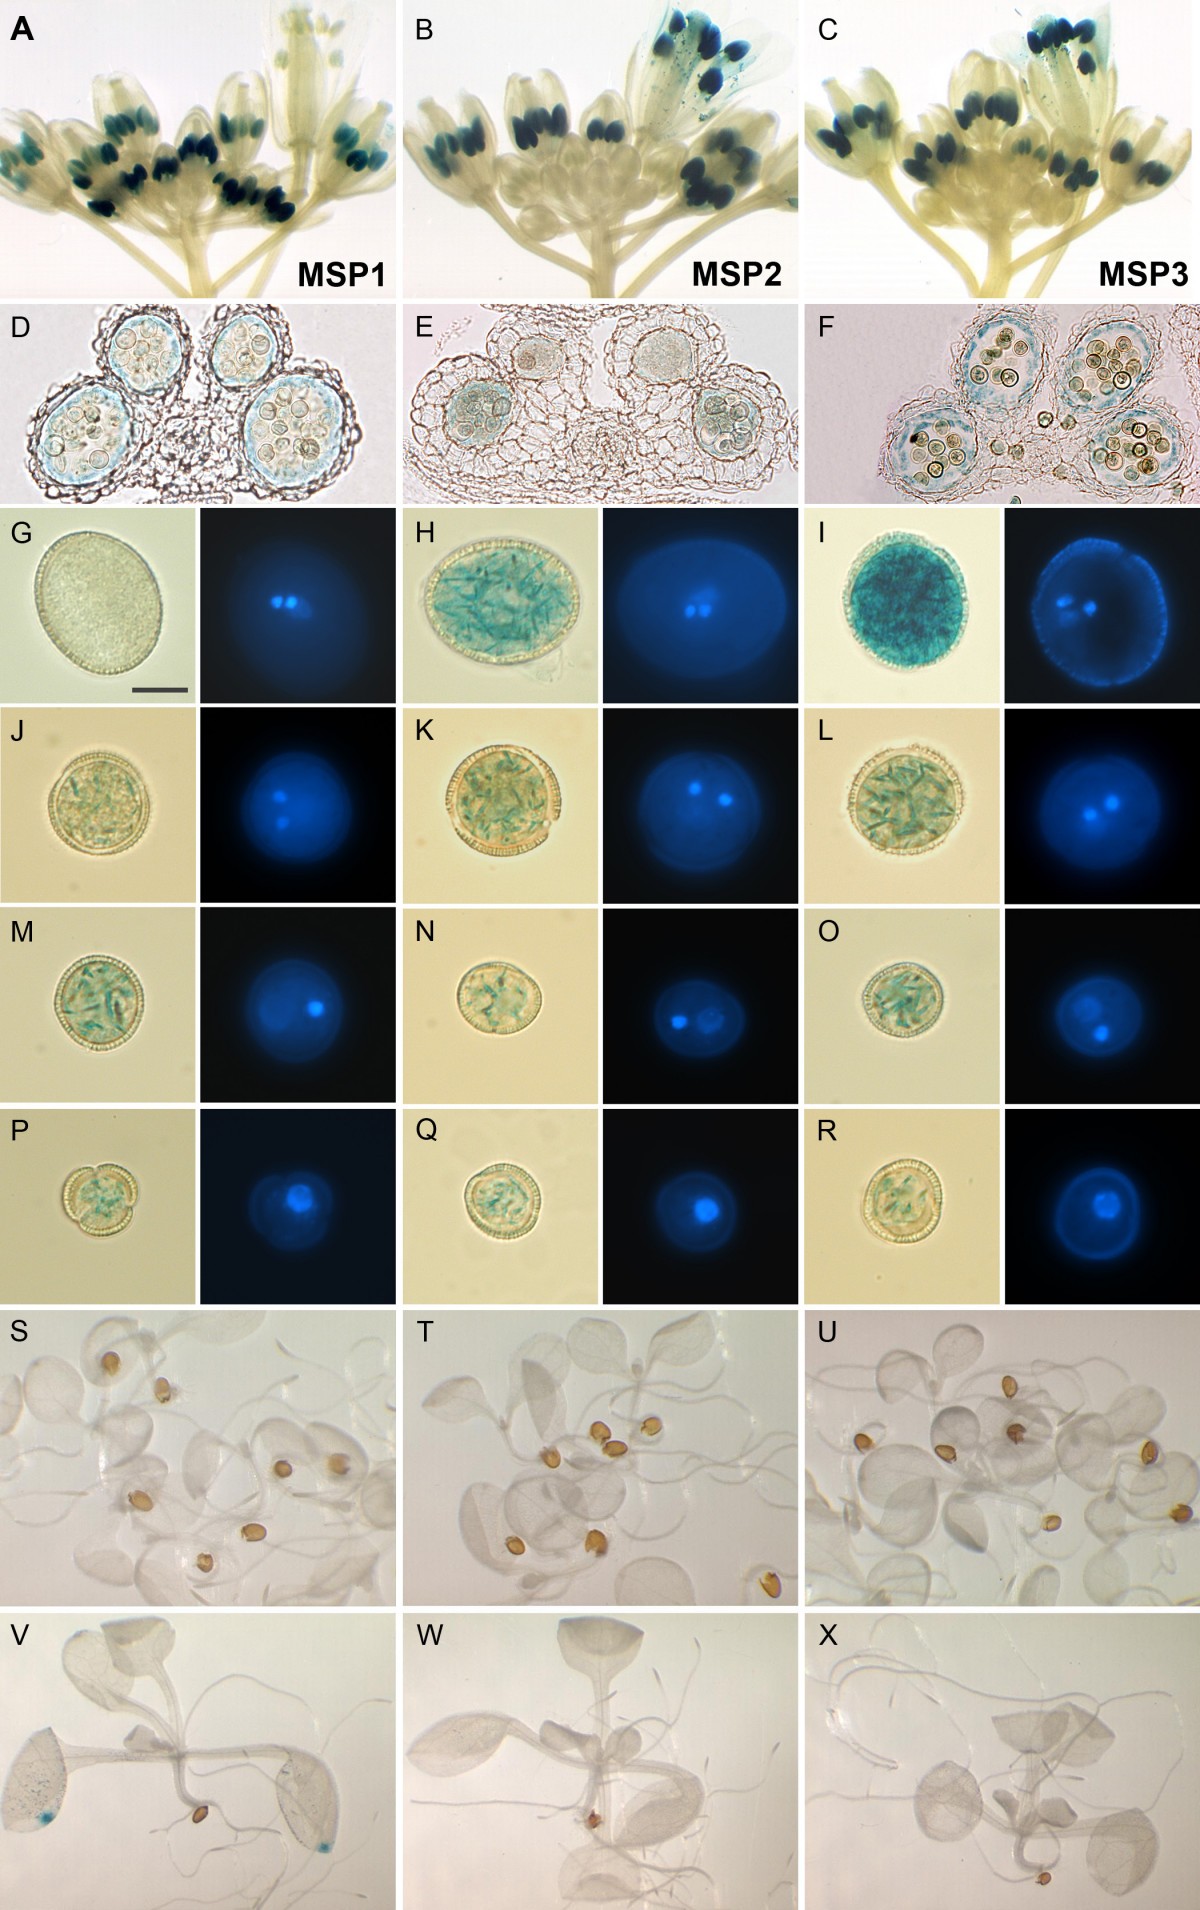 Identification Of Microspore Active Promoters That Allow Targeted Manipulation Of Gene Expression At Early Stages Of Microgametogenesis In Arabidopsis Bmc Plant Biology Full Text